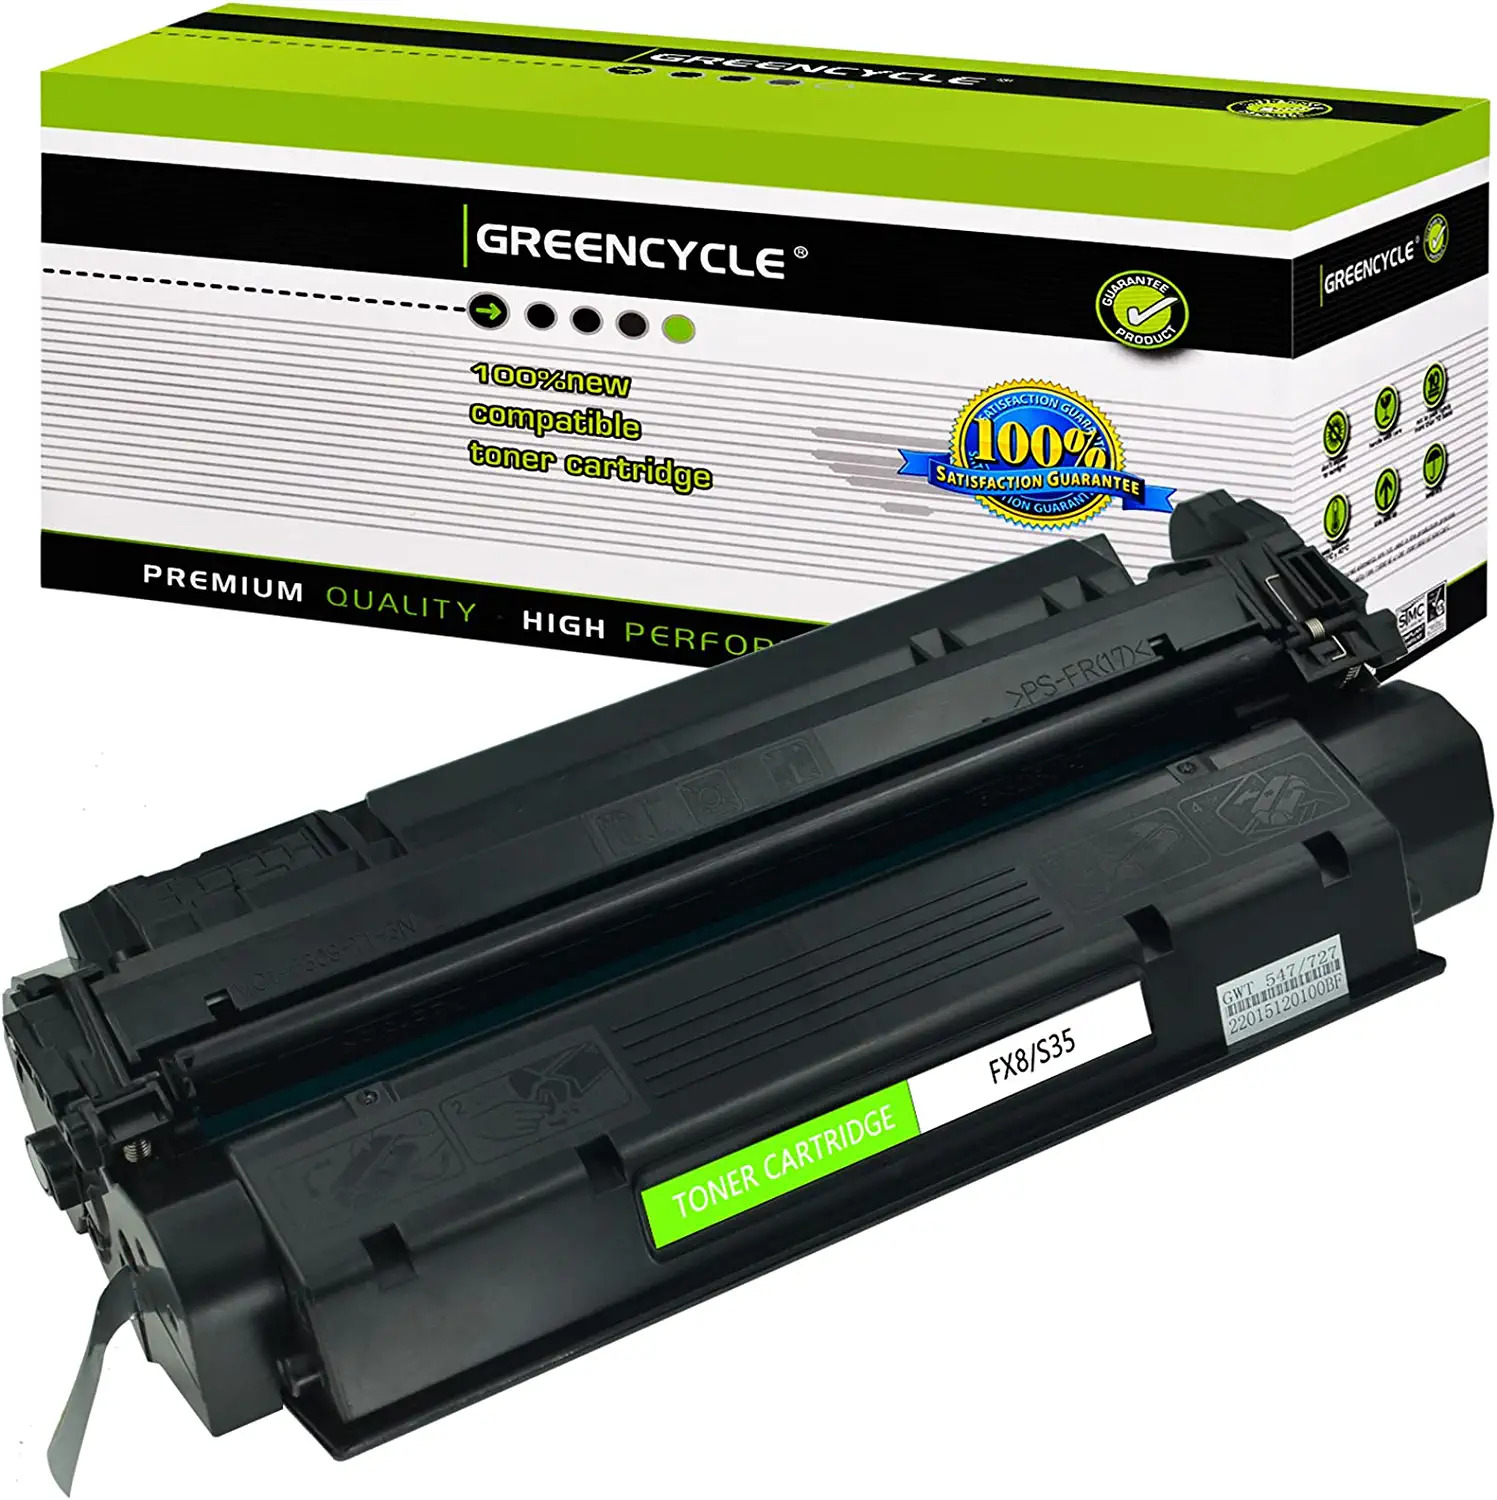 GREENCYCLE S35 S-35 Toner Cartridge Compatible for Canon imageCLASS D383 340 320